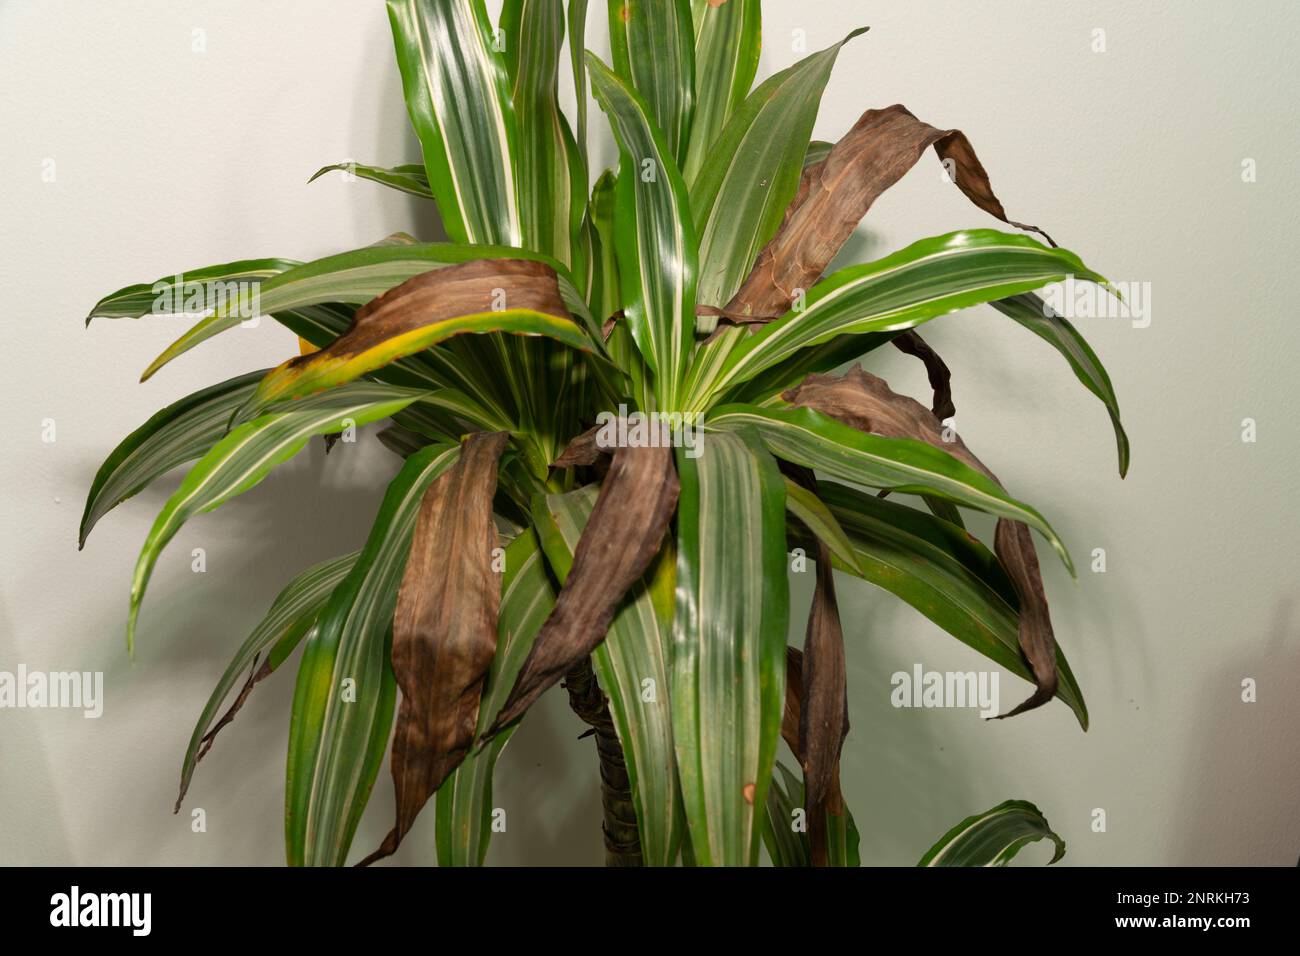 close-up view of brown dead leaves on a Dracaena fragrans deremensis or Ulises indoor houseplant. Stock Photo